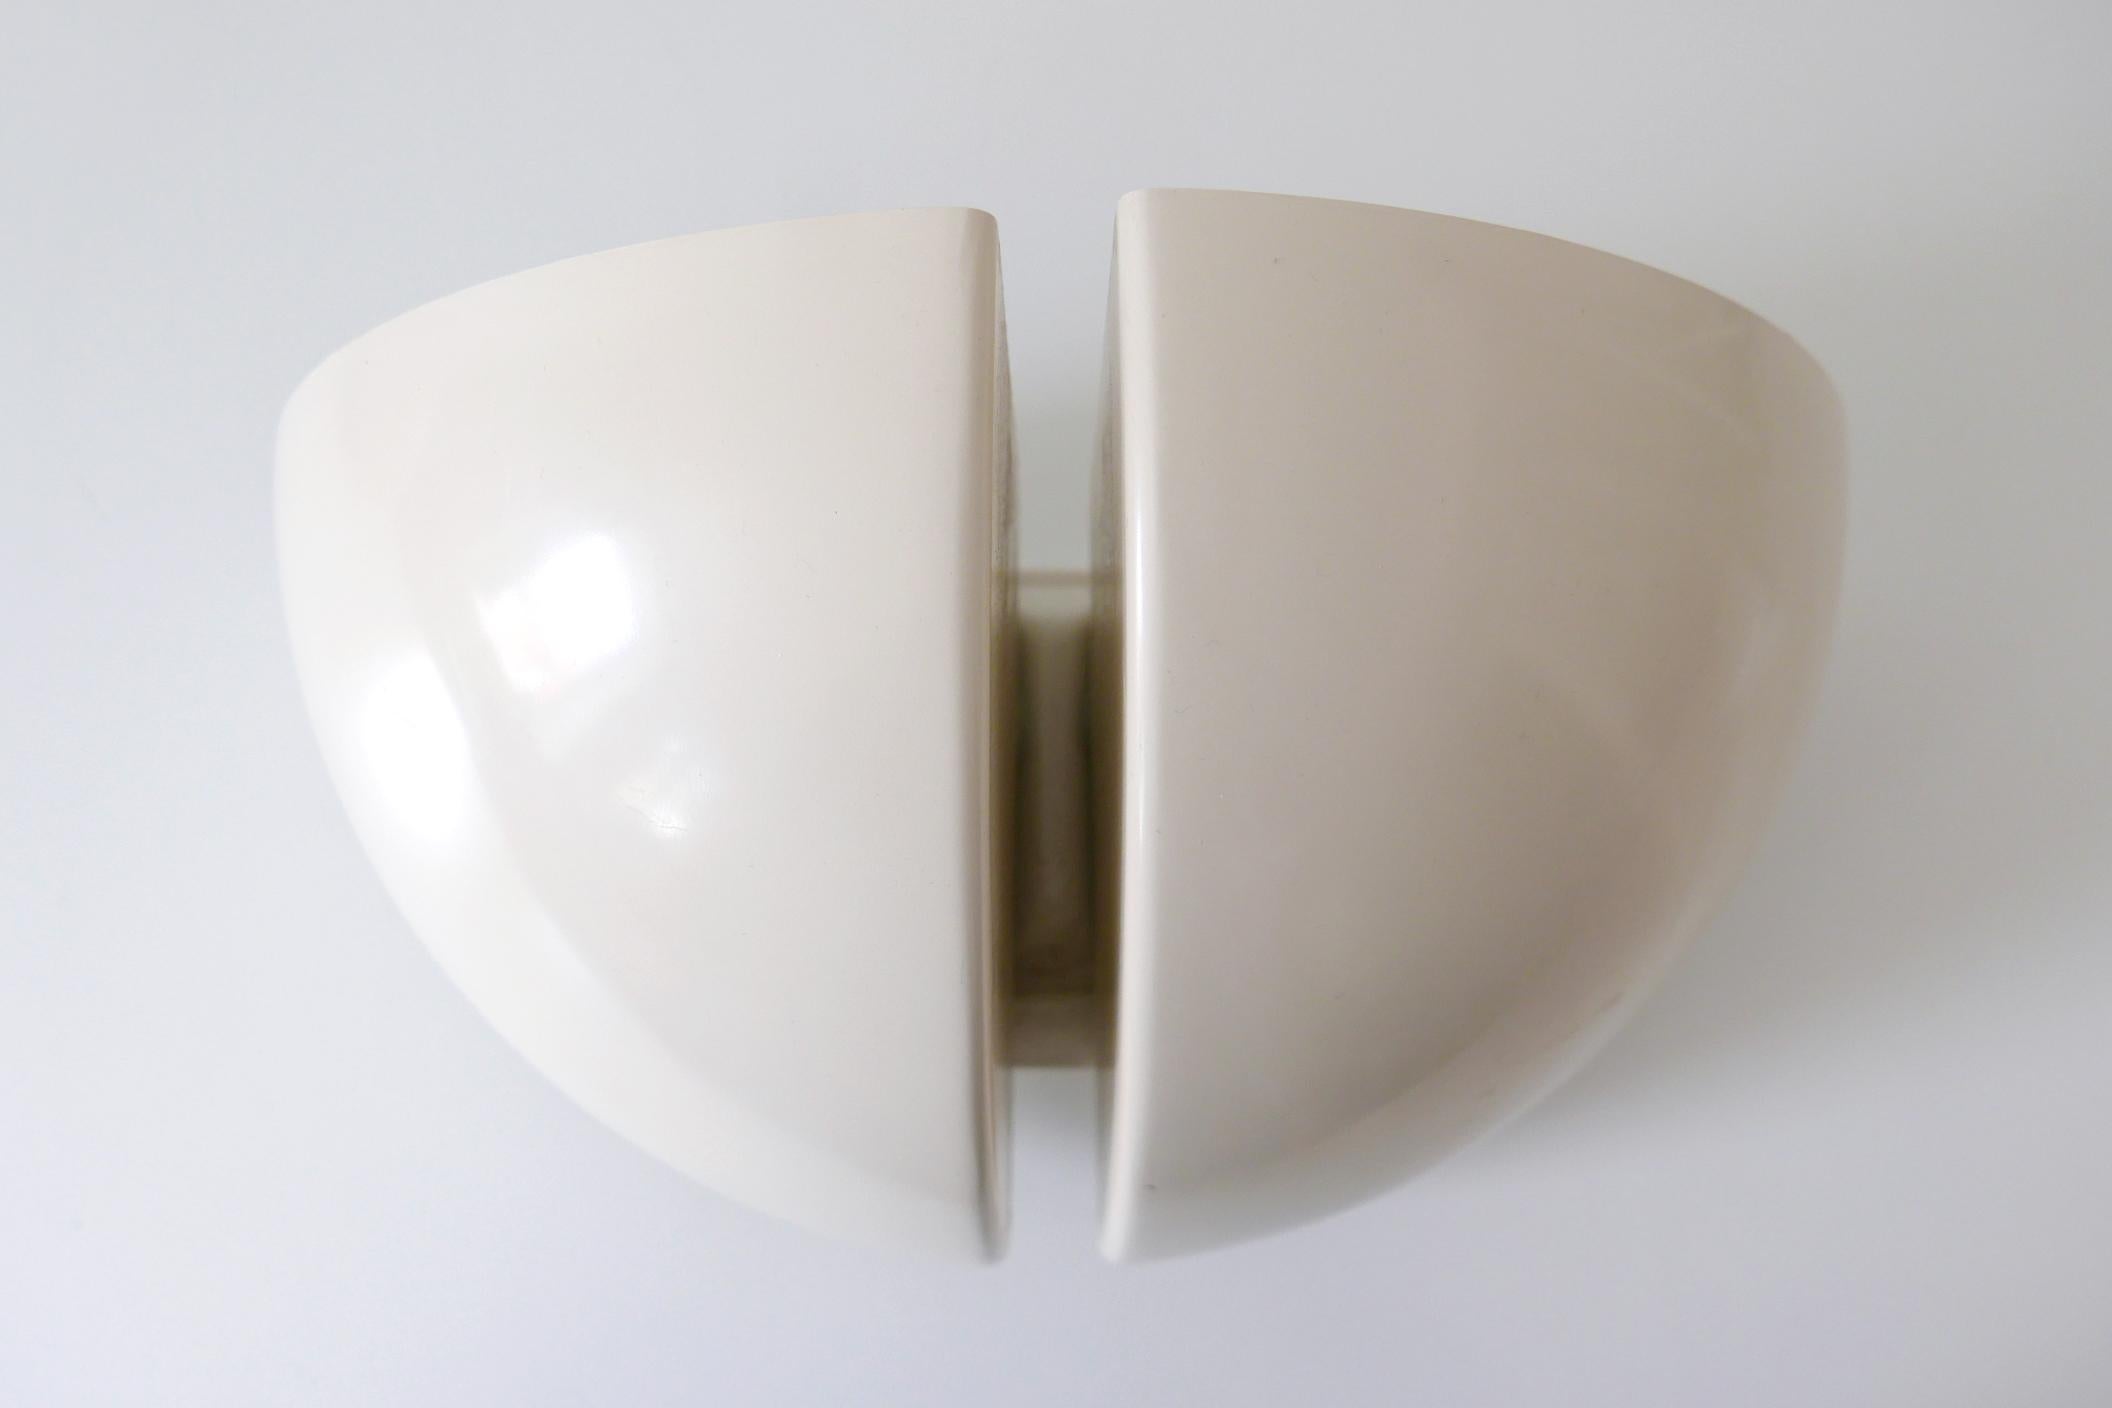 Set of Two RAAK Octavo Wall Lamps or Sconces by RAAK, Netherlands, 1970s For Sale 3